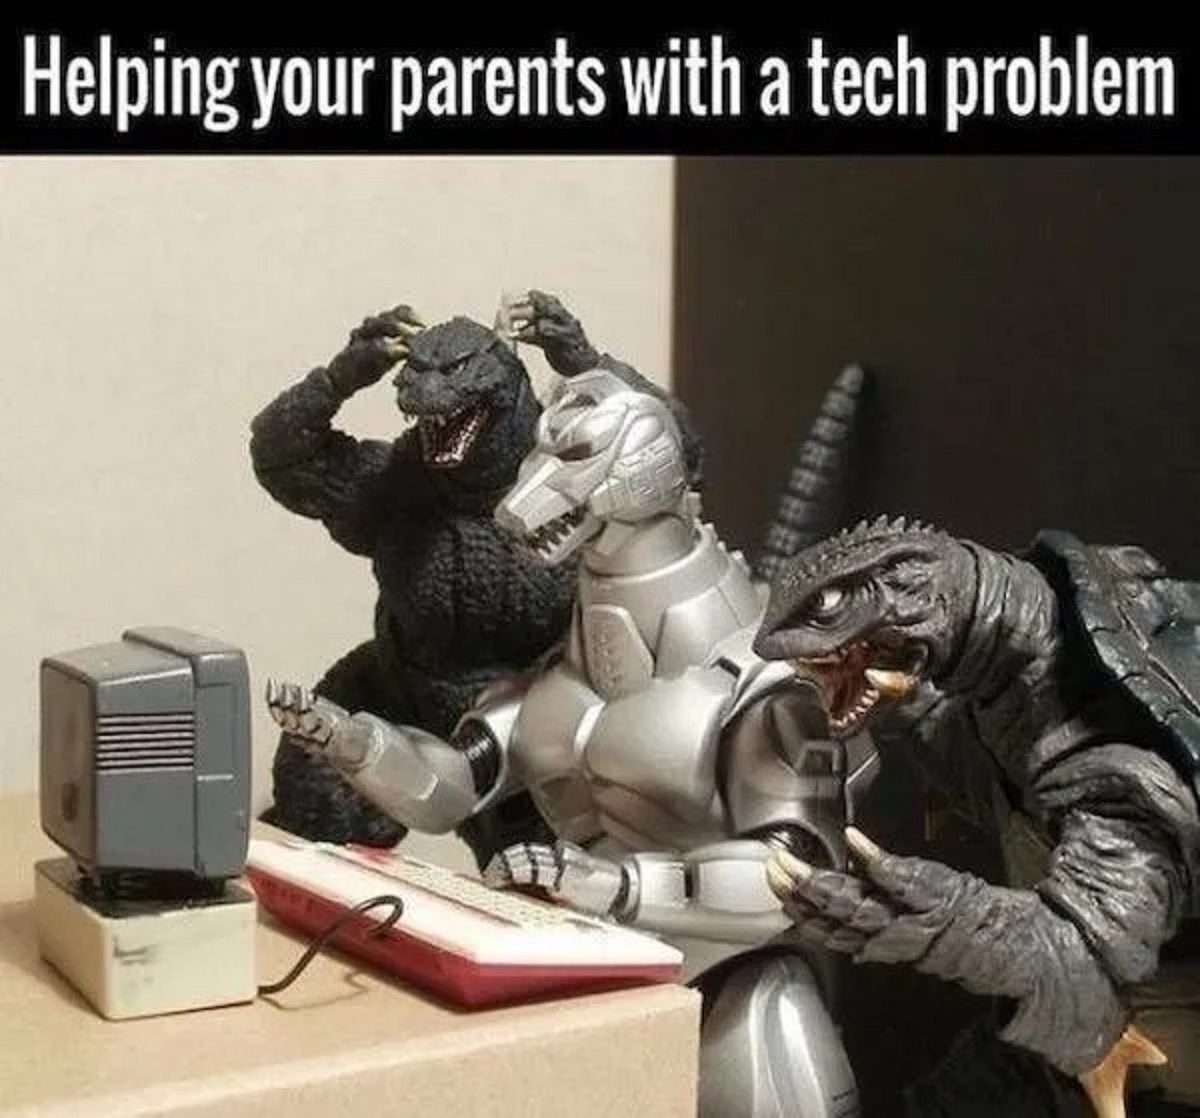 helping your parents with a tech problem - Helping your parents with a tech problem